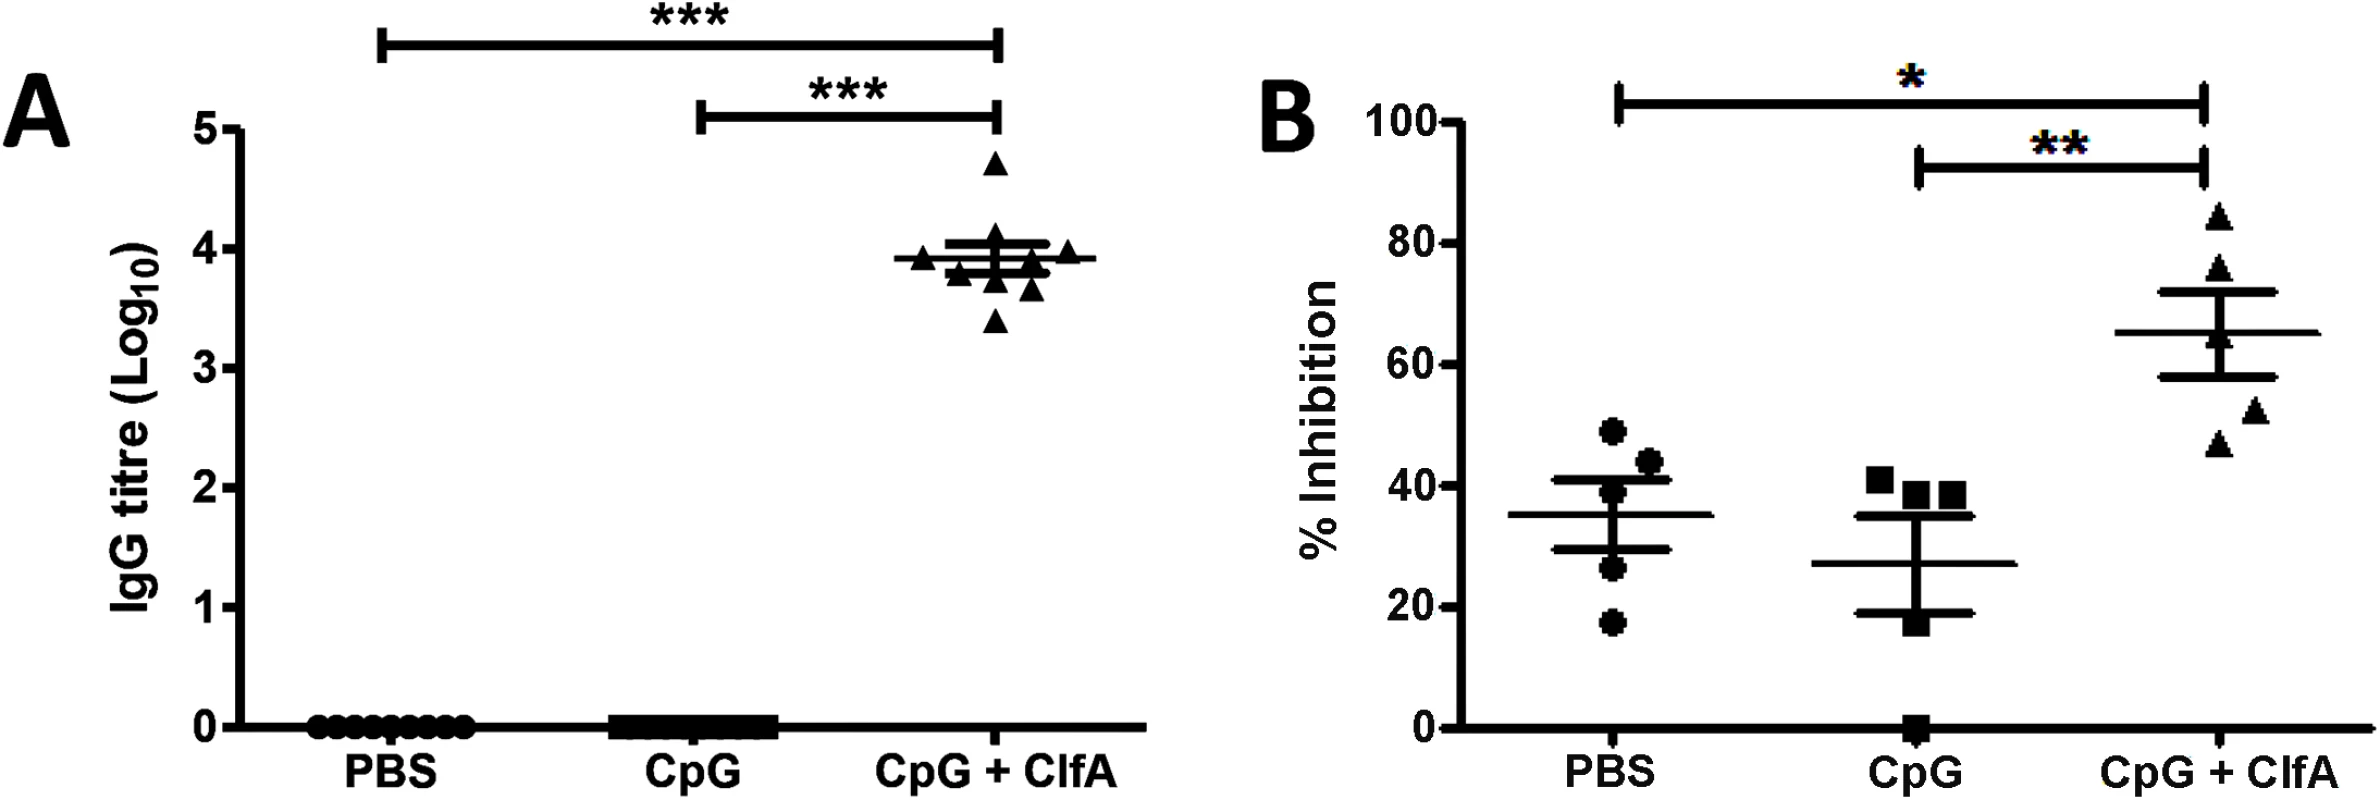 Vaccination with CpG and ClfA induces ClfA-specific cellular and humoral responses.